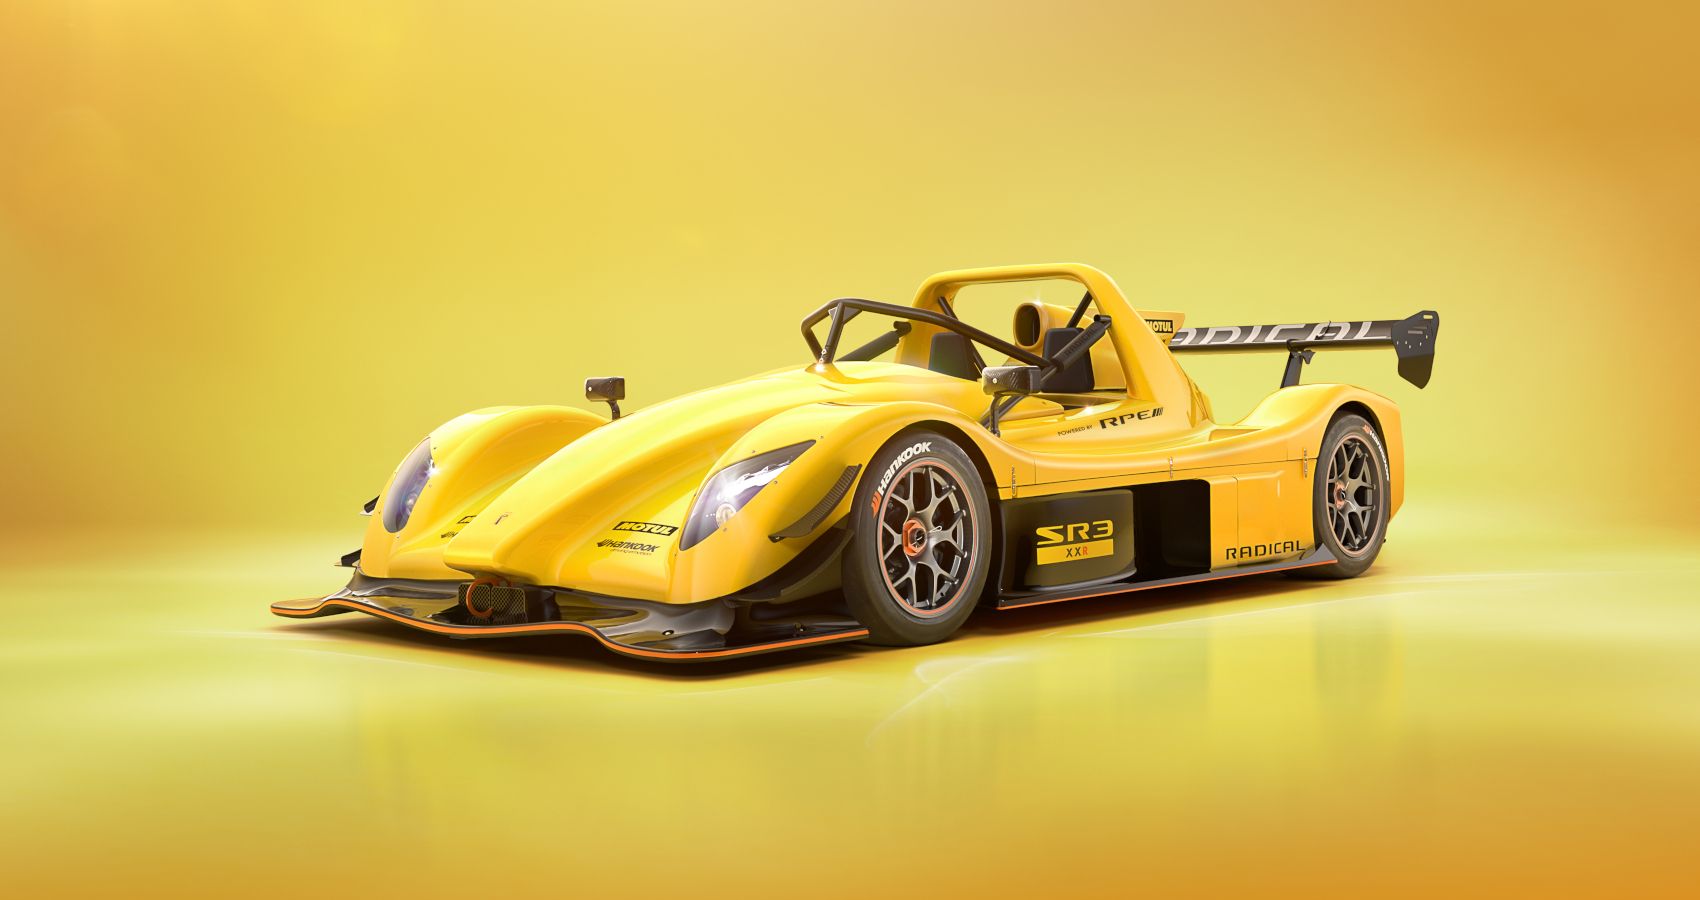 Why The 232-HP Monitor-Prepared Radical SR3 XXR Is The Greenest Monitor Weapon